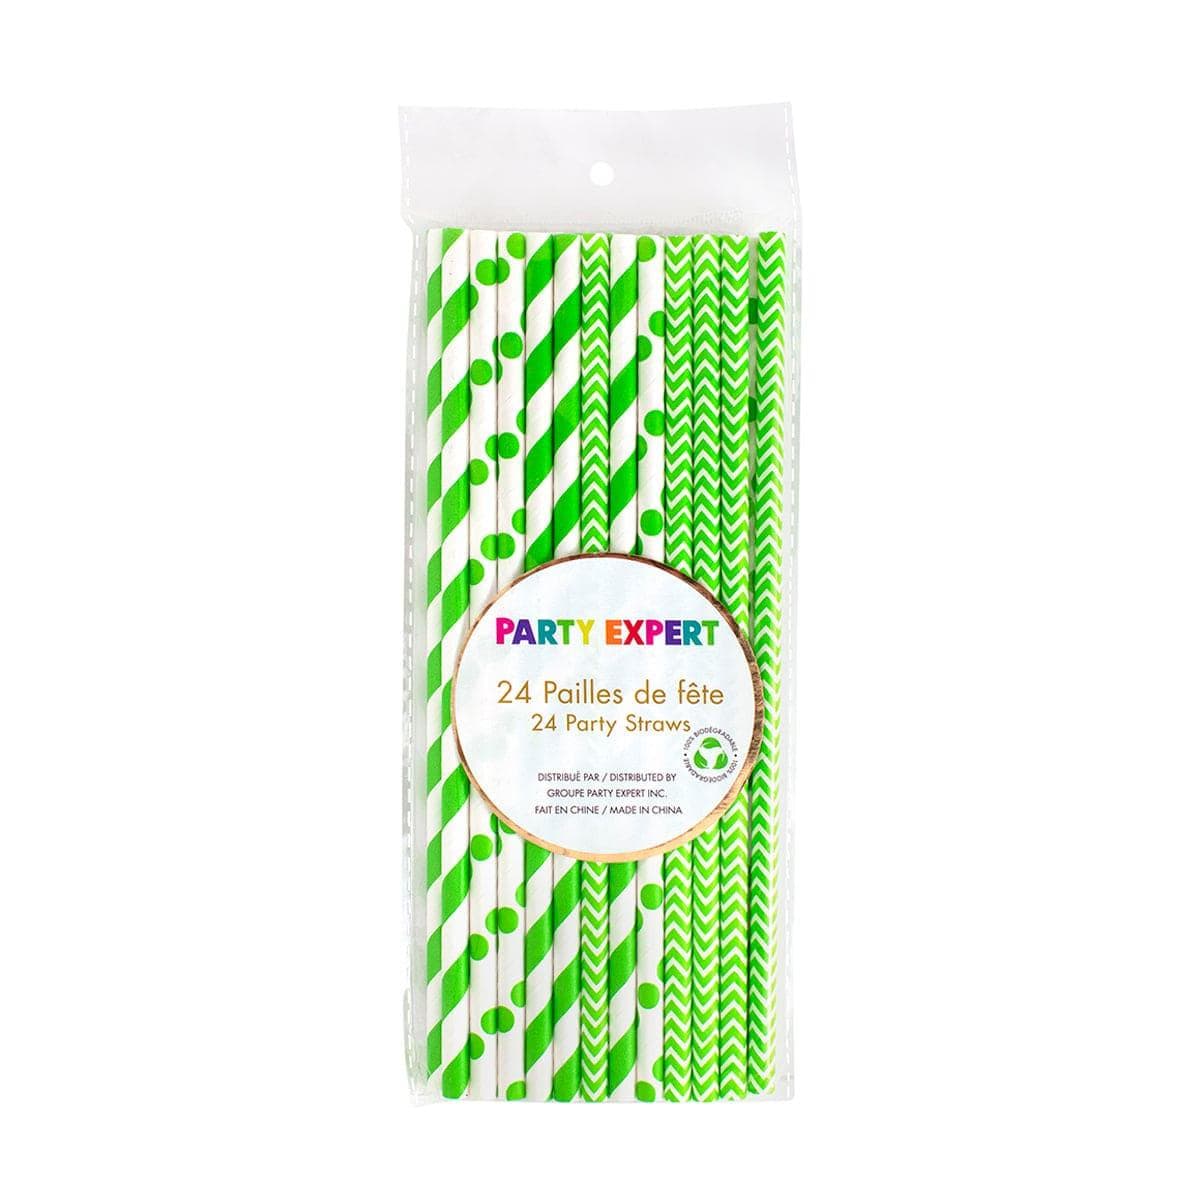 YIWU SANDY PAPER PRODUCTS CO., LTD Everyday Entertaining Lime Green And White Paper Straws, 24 Count